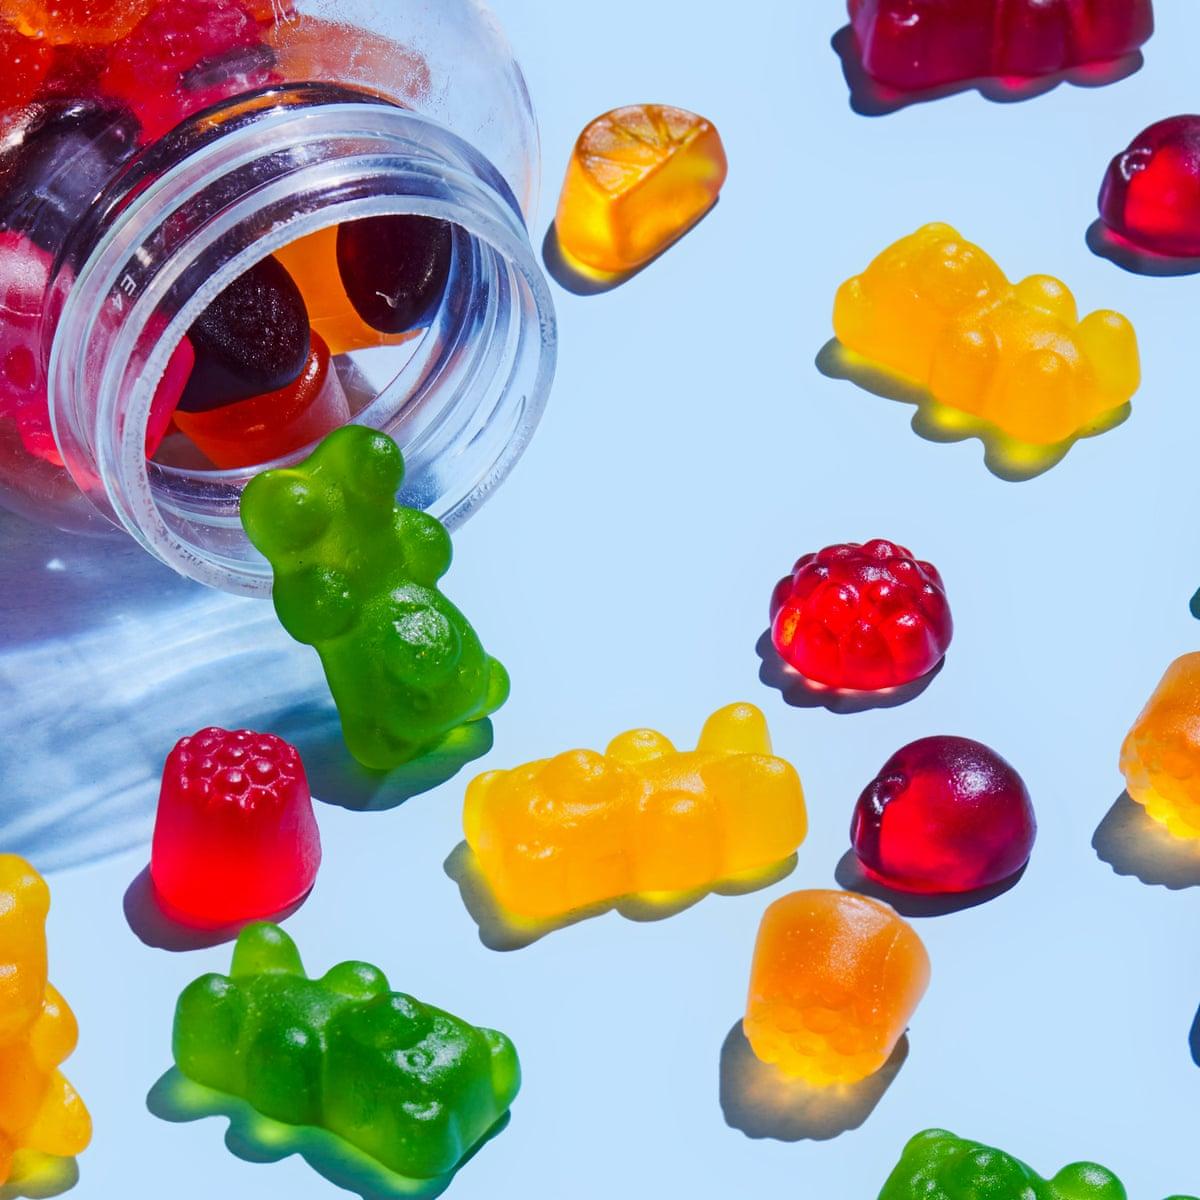 Colorful gummy bears and other fruit-shaped candies spilling out of a clear plastic bottle onto a blue surface.